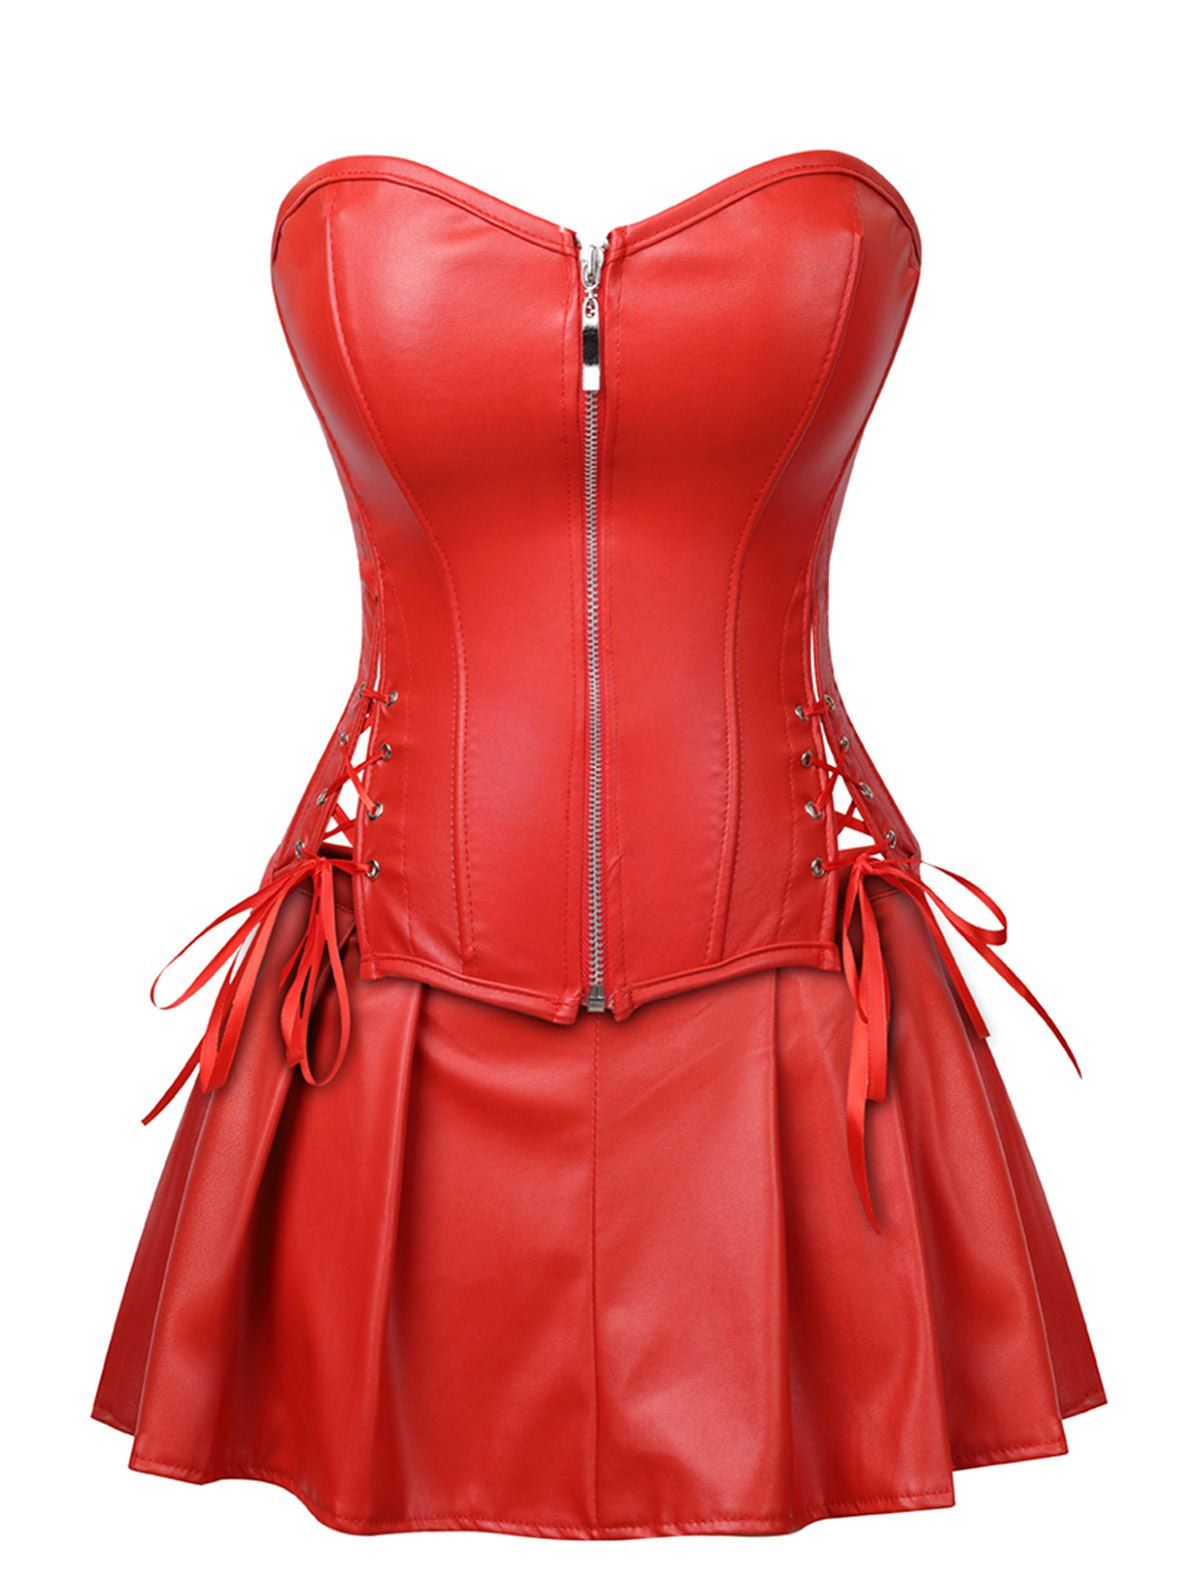 Off Plus Size Strapless Lace Up Corset With Mini Skirt In Red Dresslily